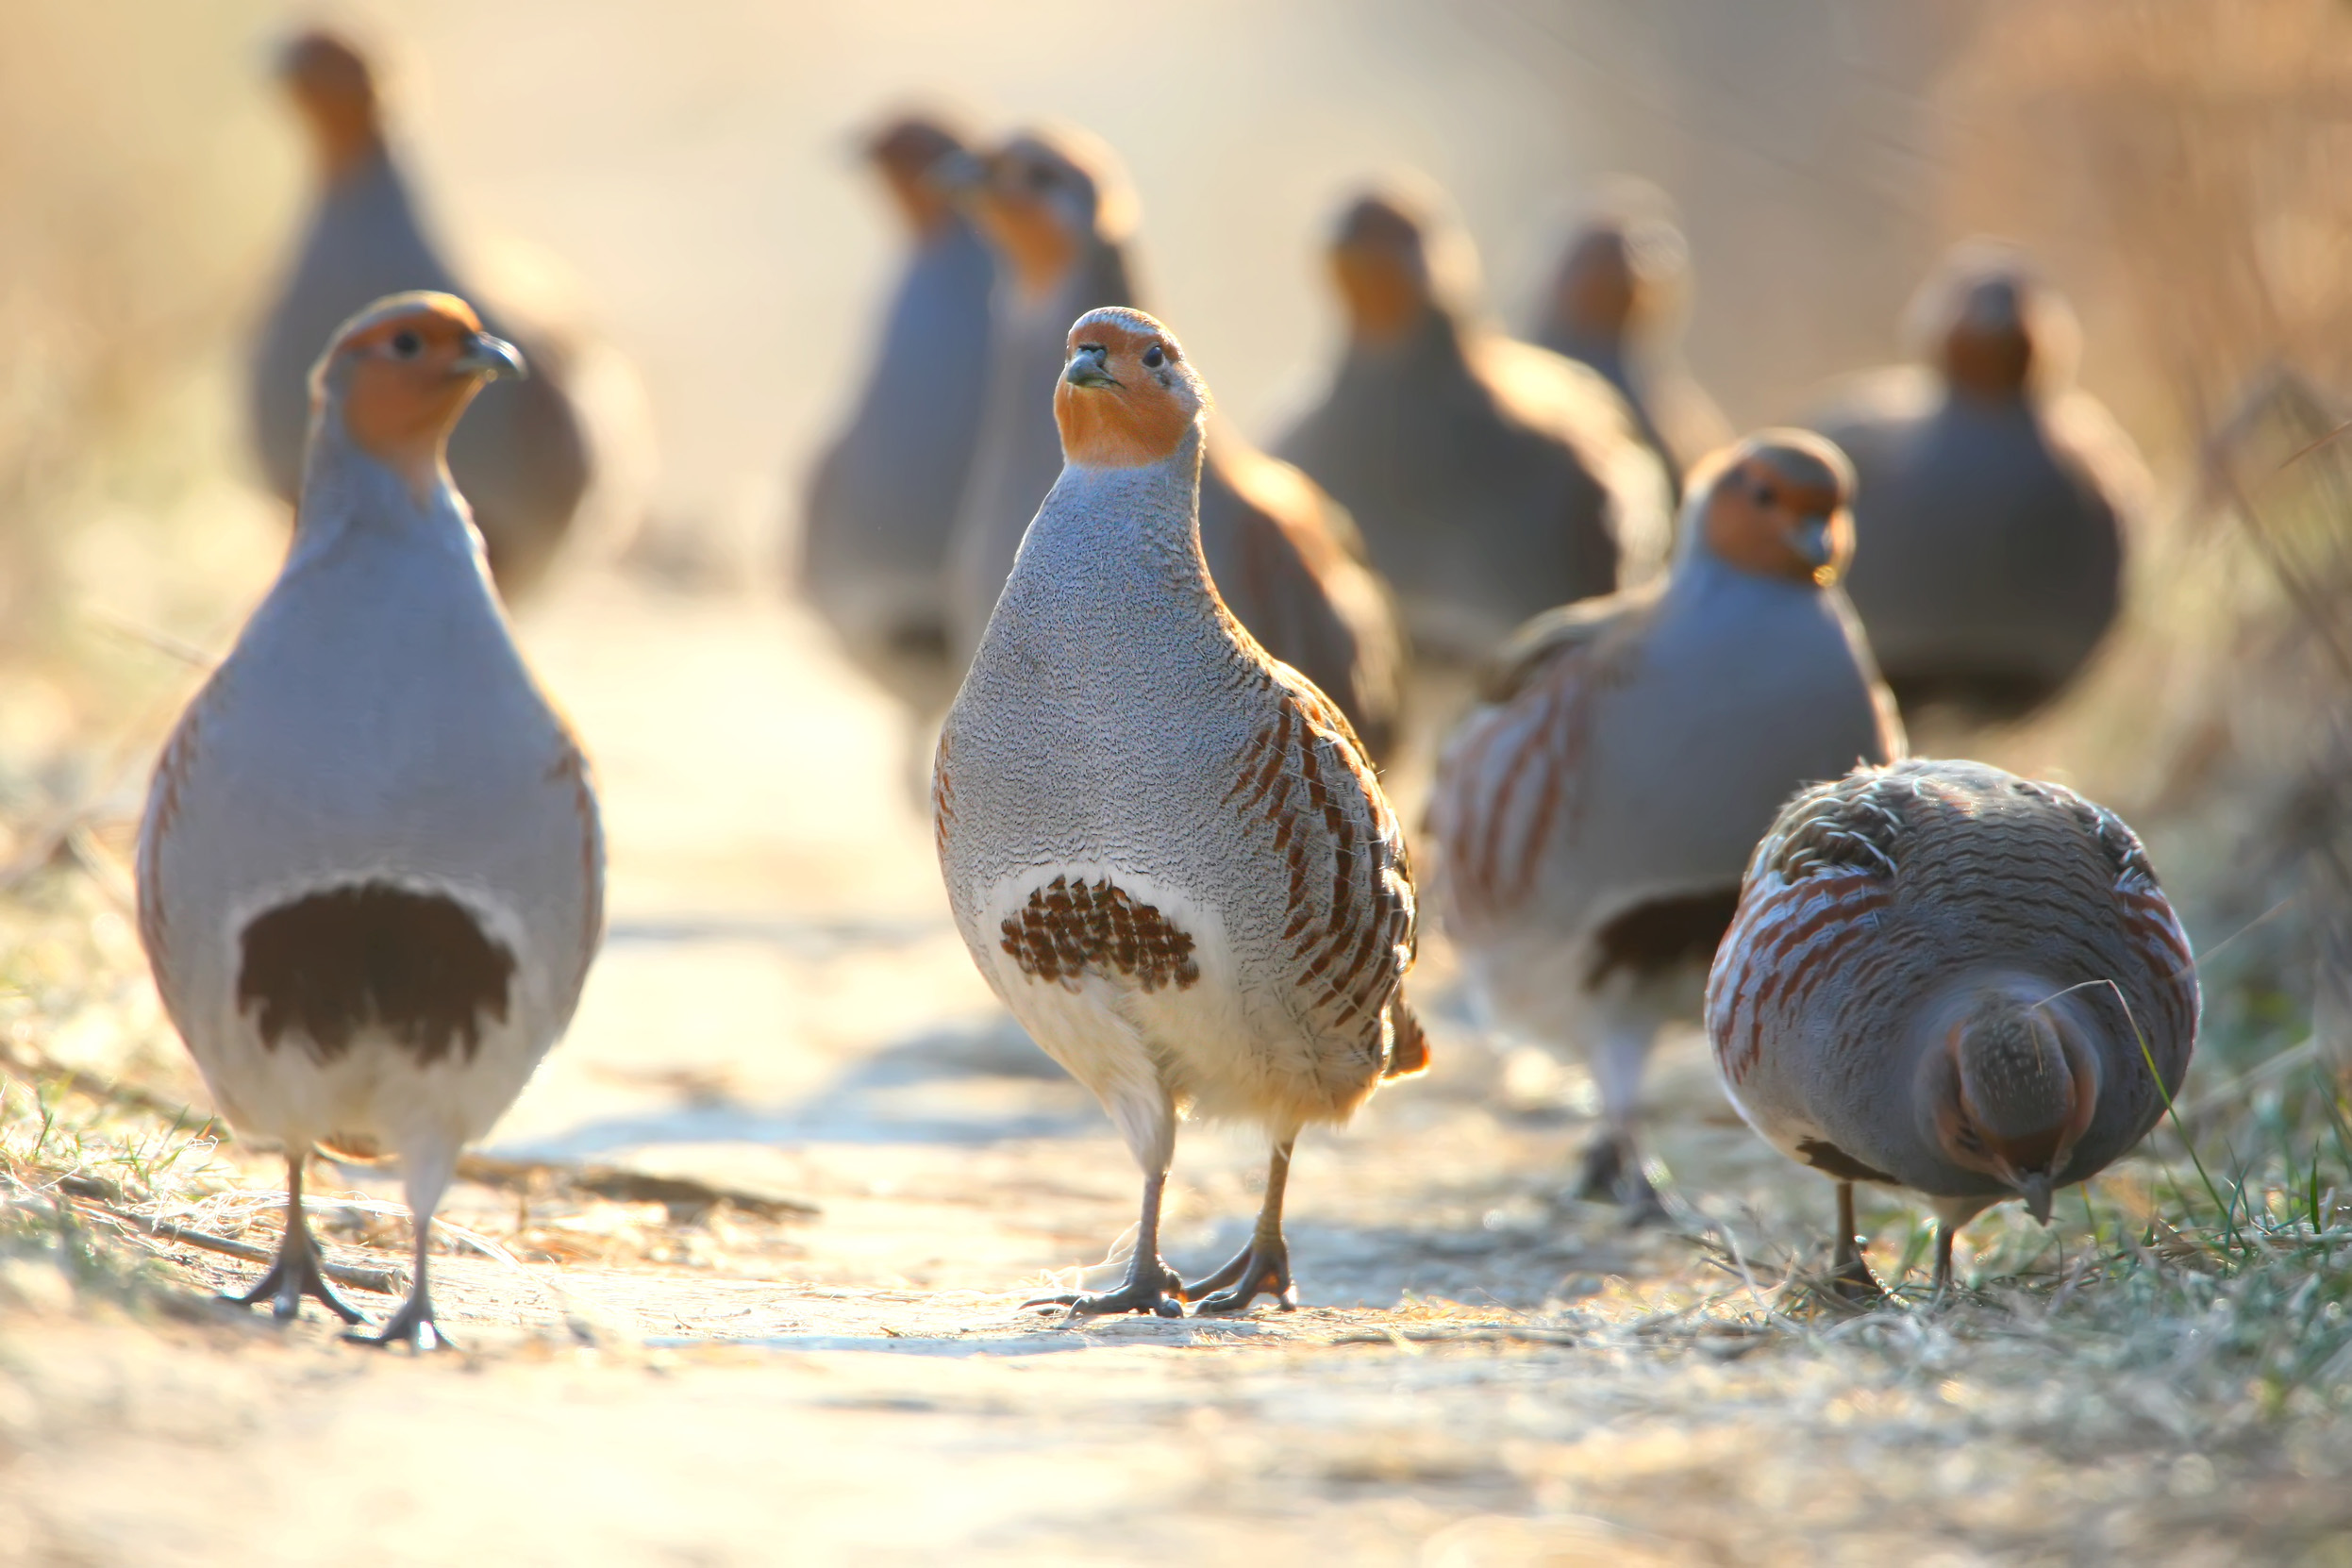 A group of Grey Partridge walking together long a dusty path.